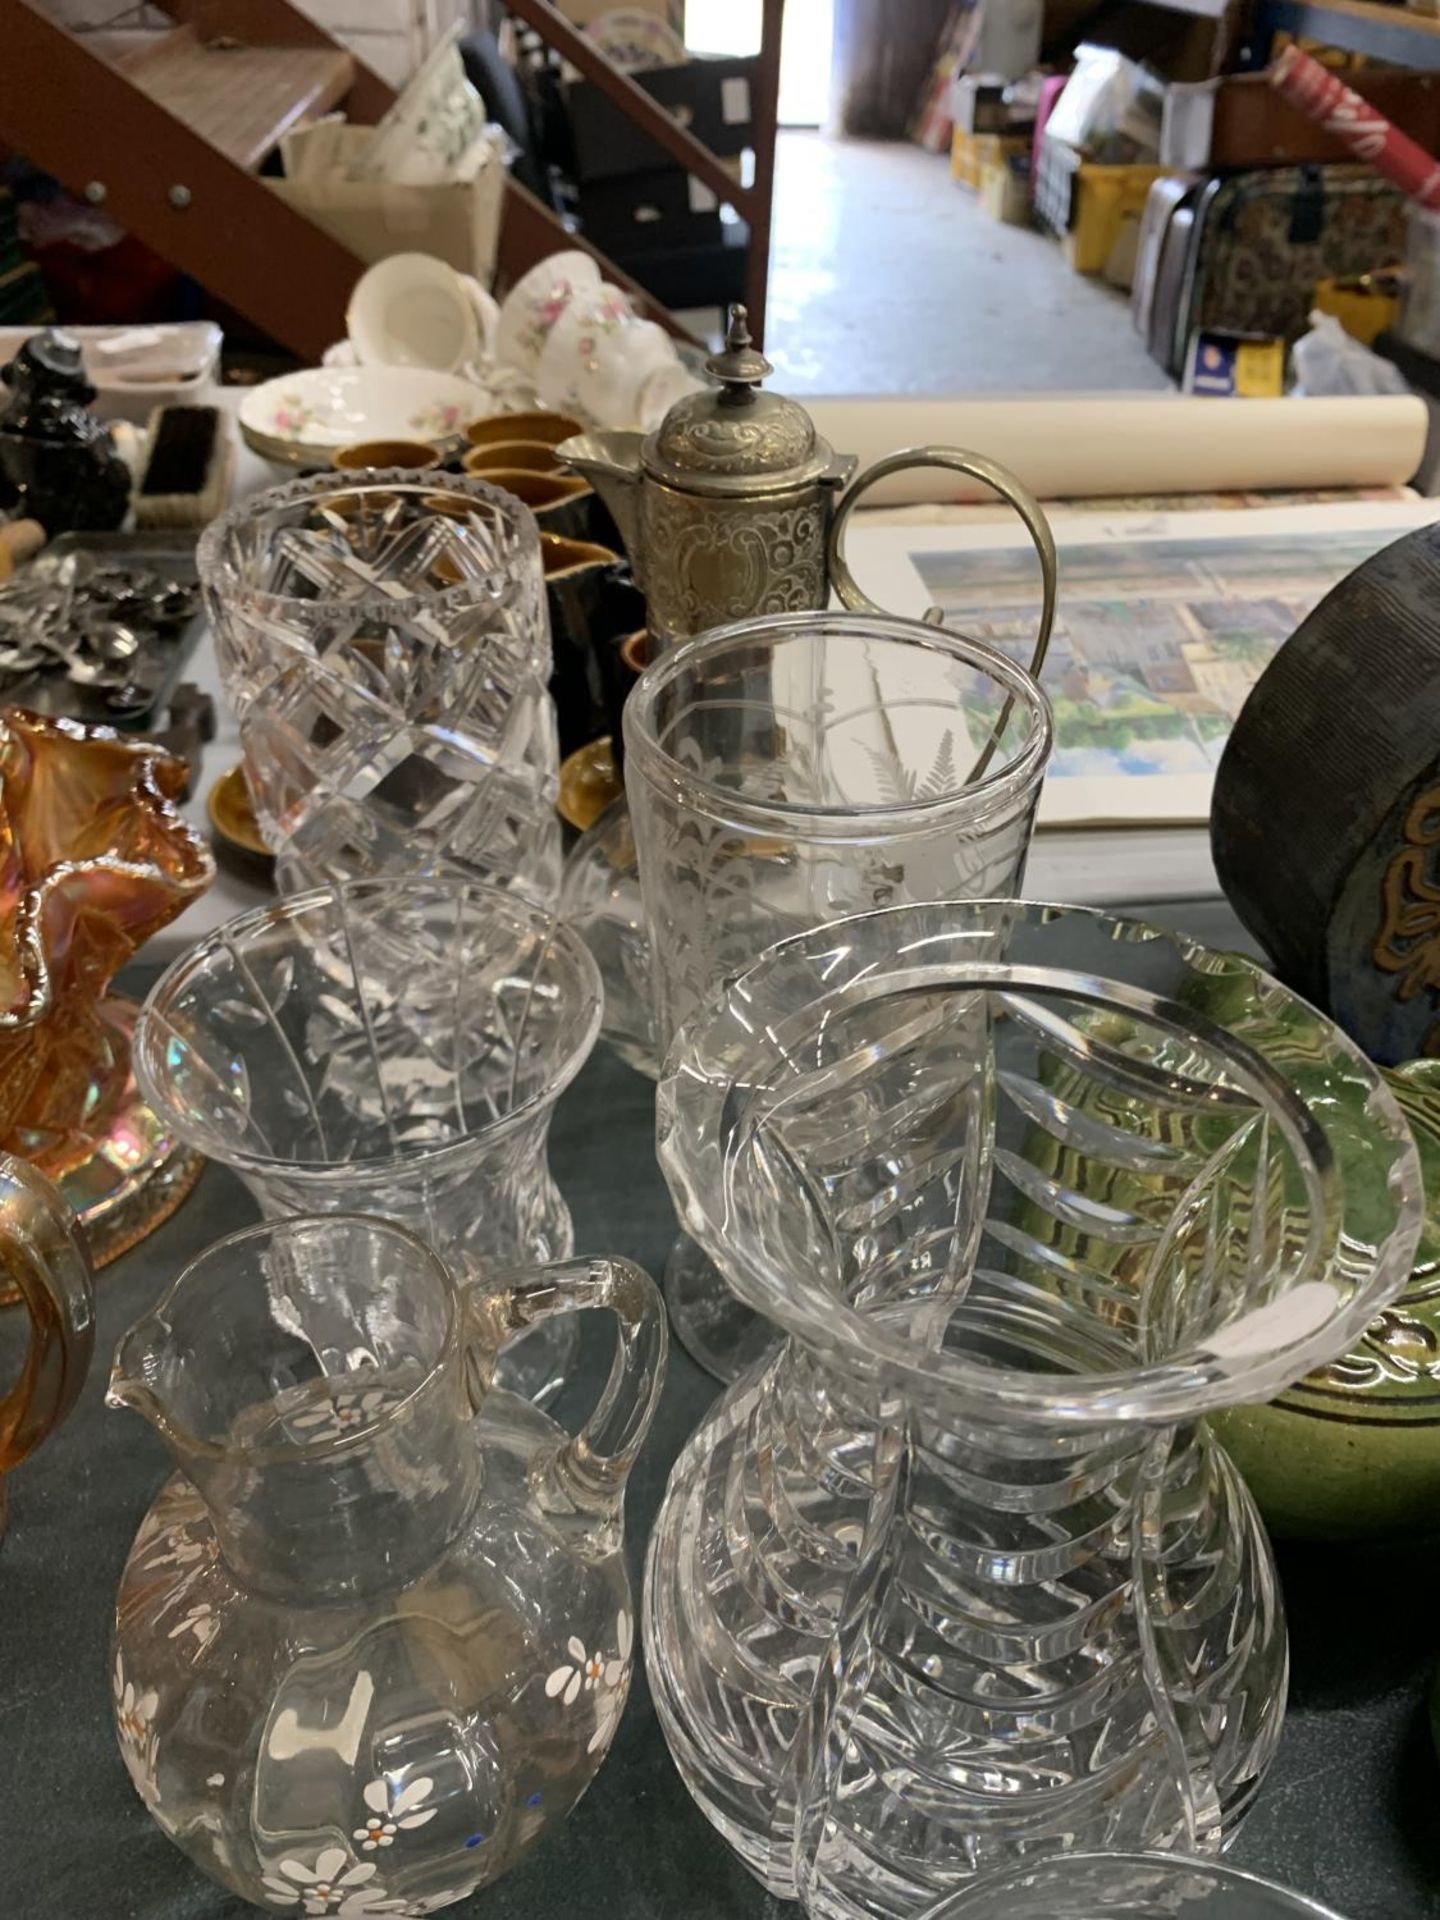 A QUANTITY OF VINTAGE CLEAR GLASSWARE TO INCLUDE A CLARET JUG, VASES, JUGS, BOWLS, ETC - Image 2 of 7